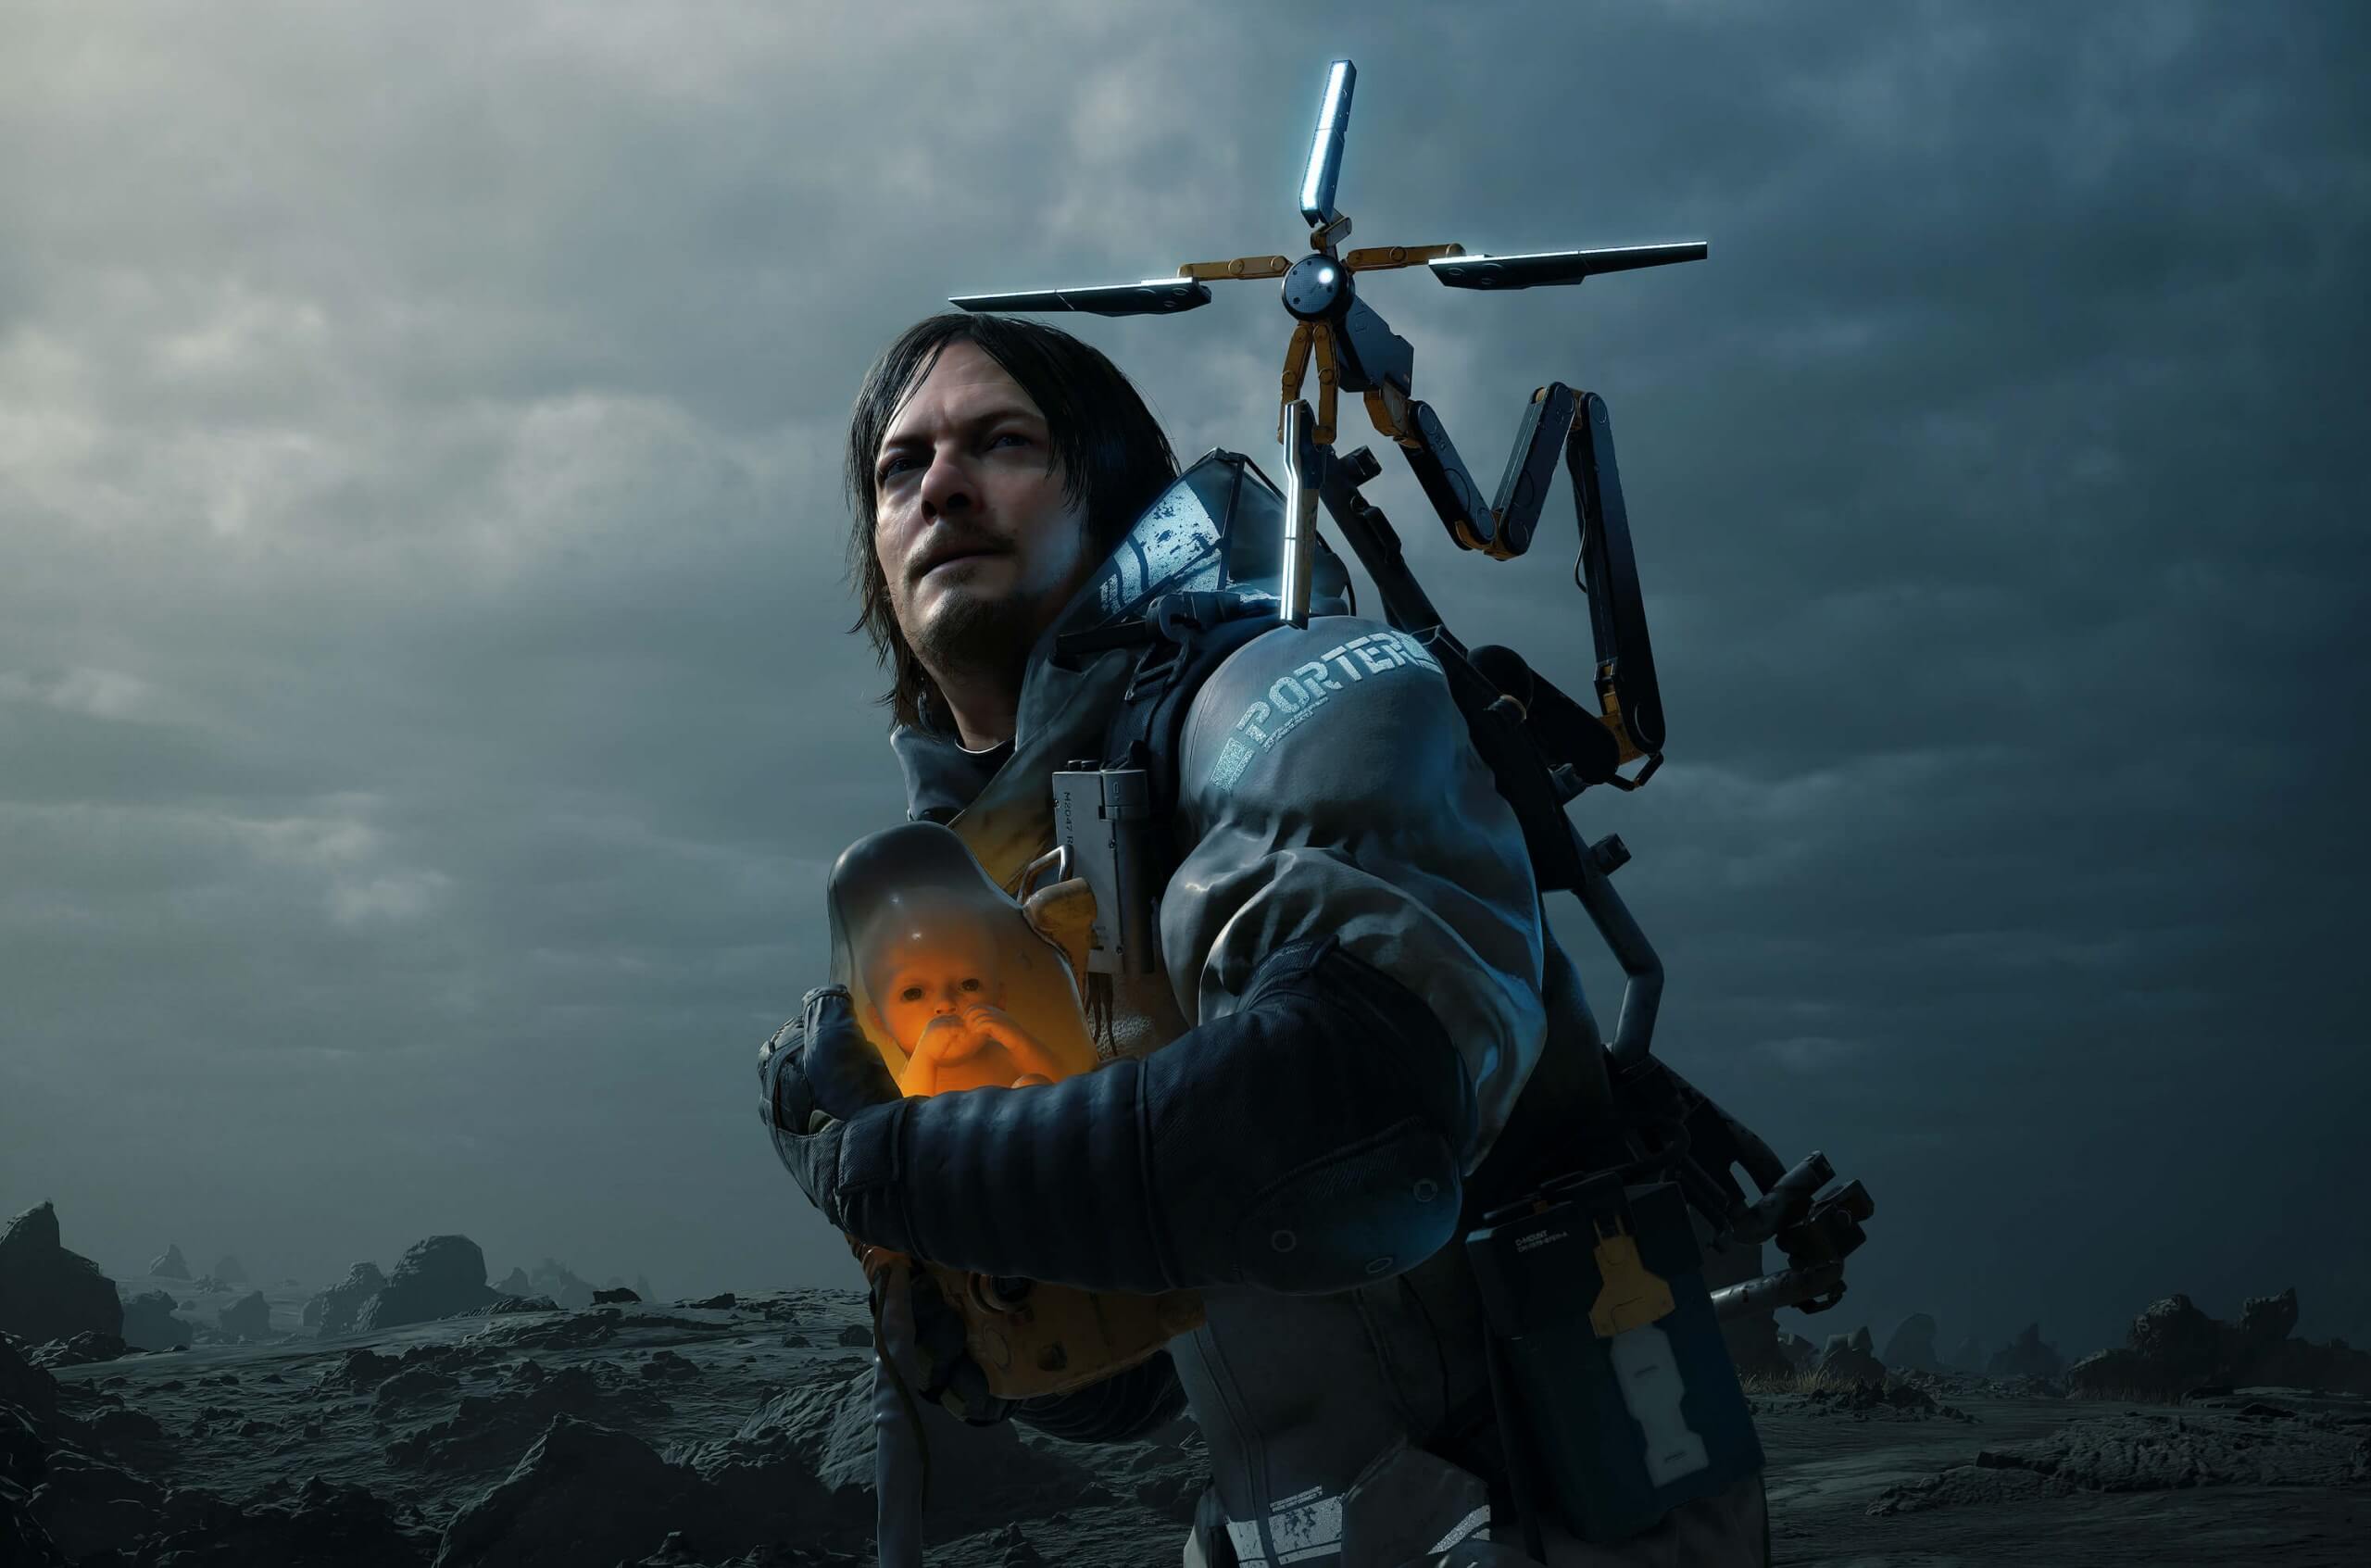 Death Stranding is coming to PC 'early' summer 2020